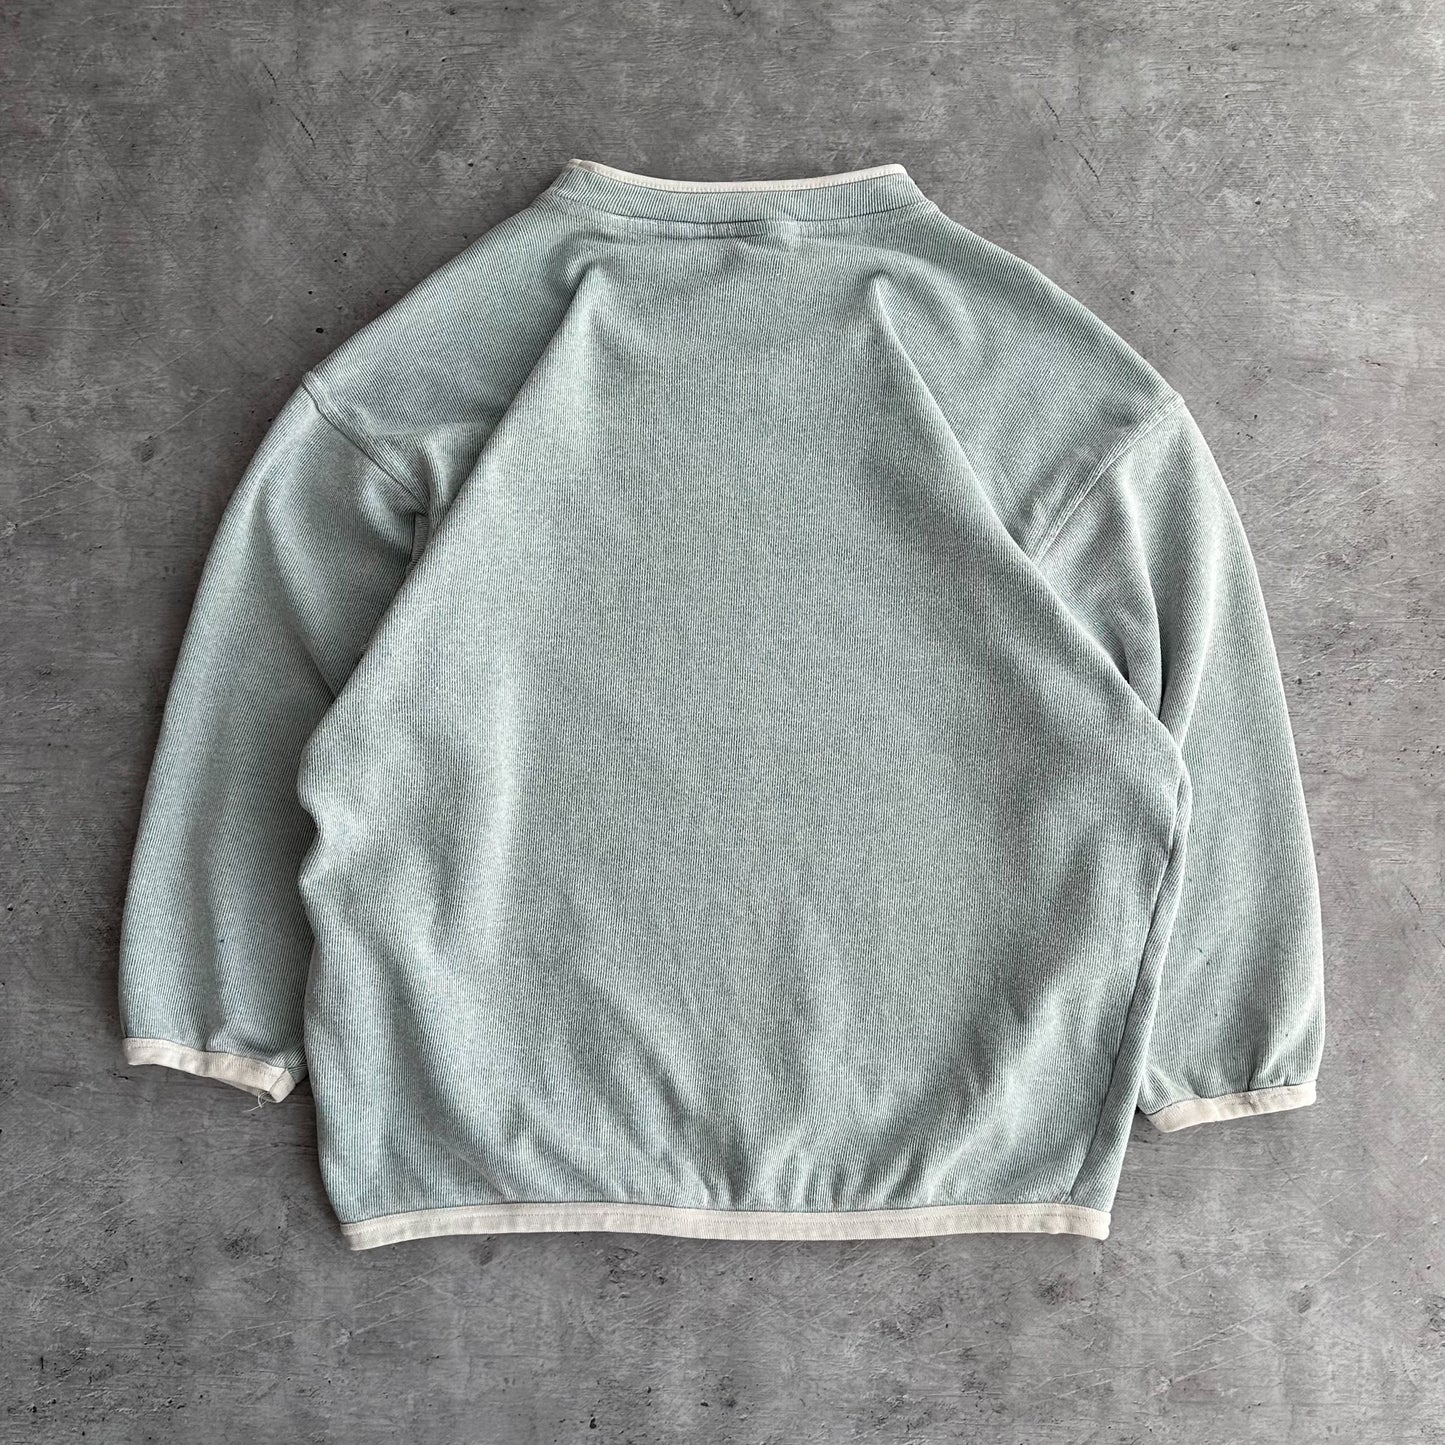 Vintage O'Neill Sweater